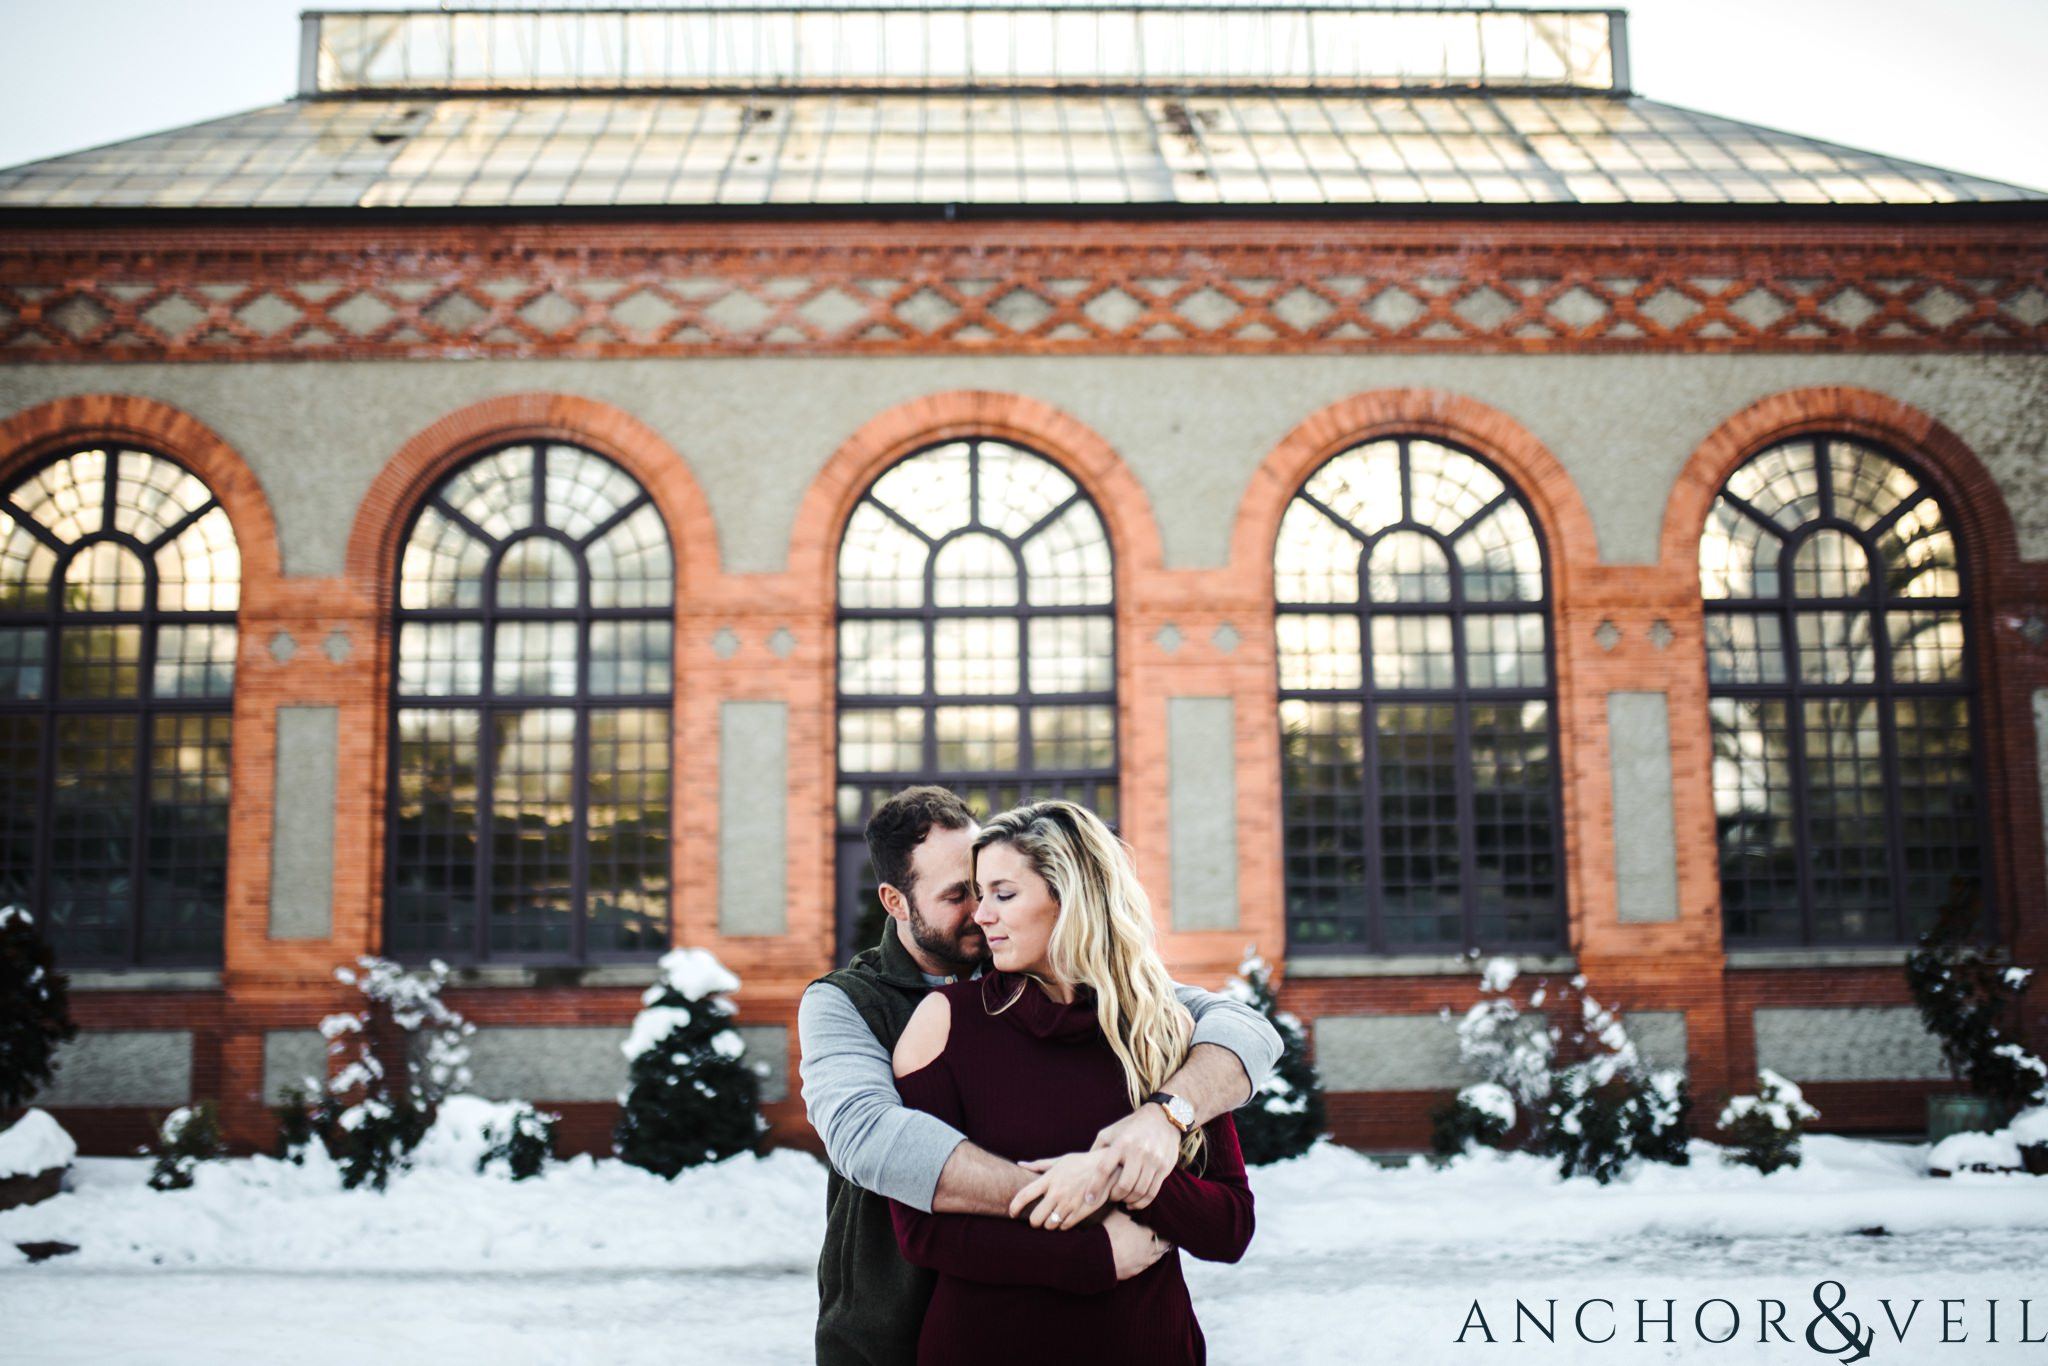 in front of the garden greenhouse during their Snowy Biltmore Engagement Session